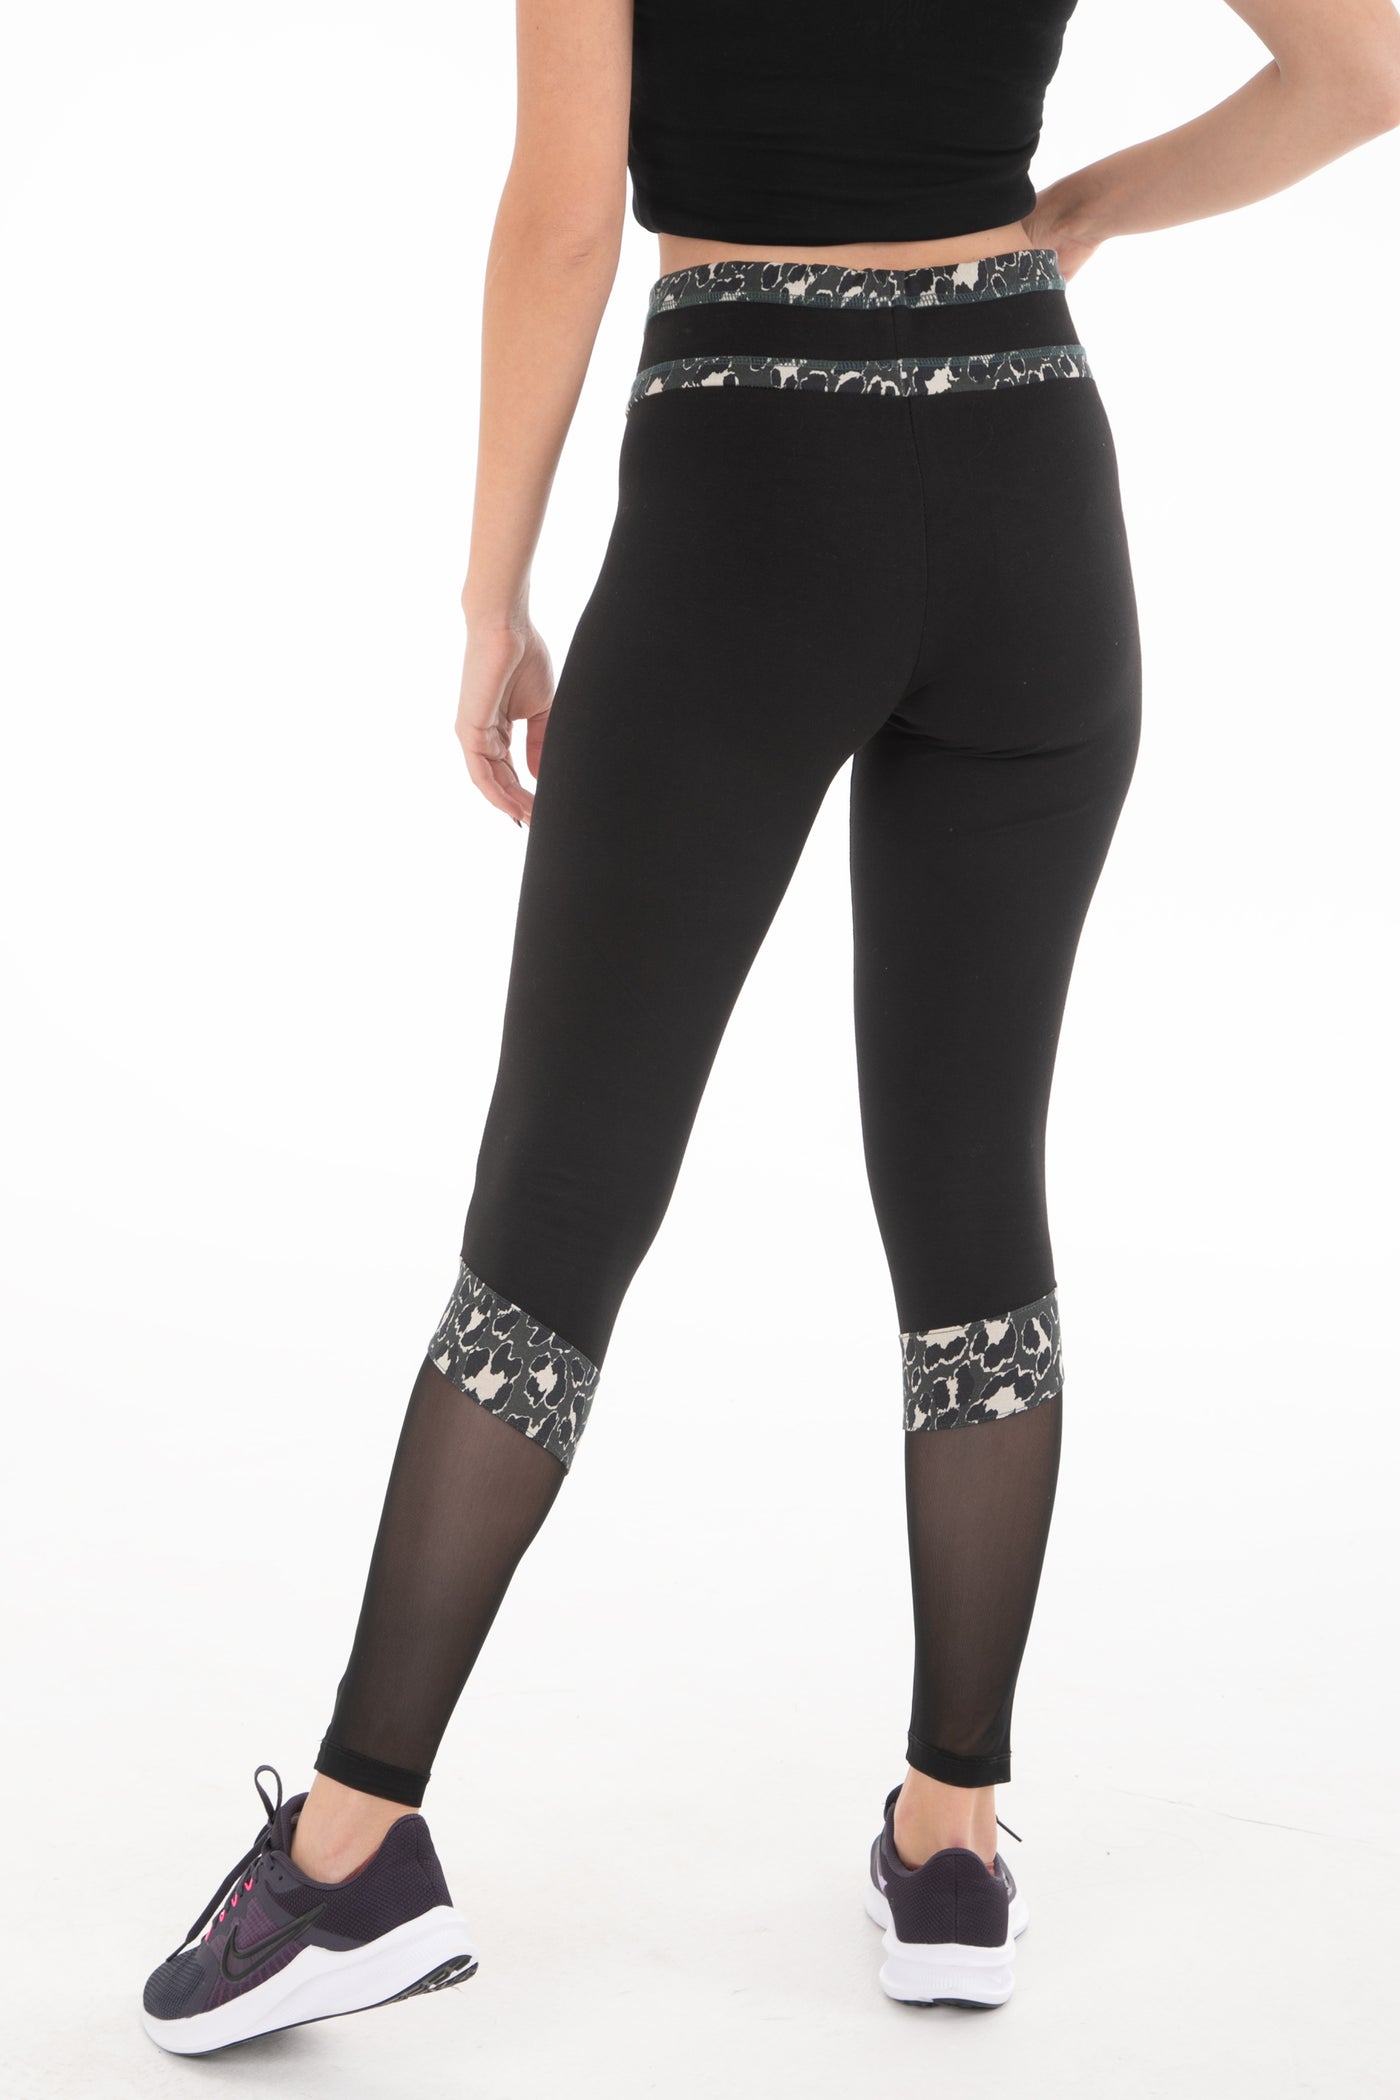 Hill & Dale Sports Legging With Leopard Detail and Lace Bottom Leg